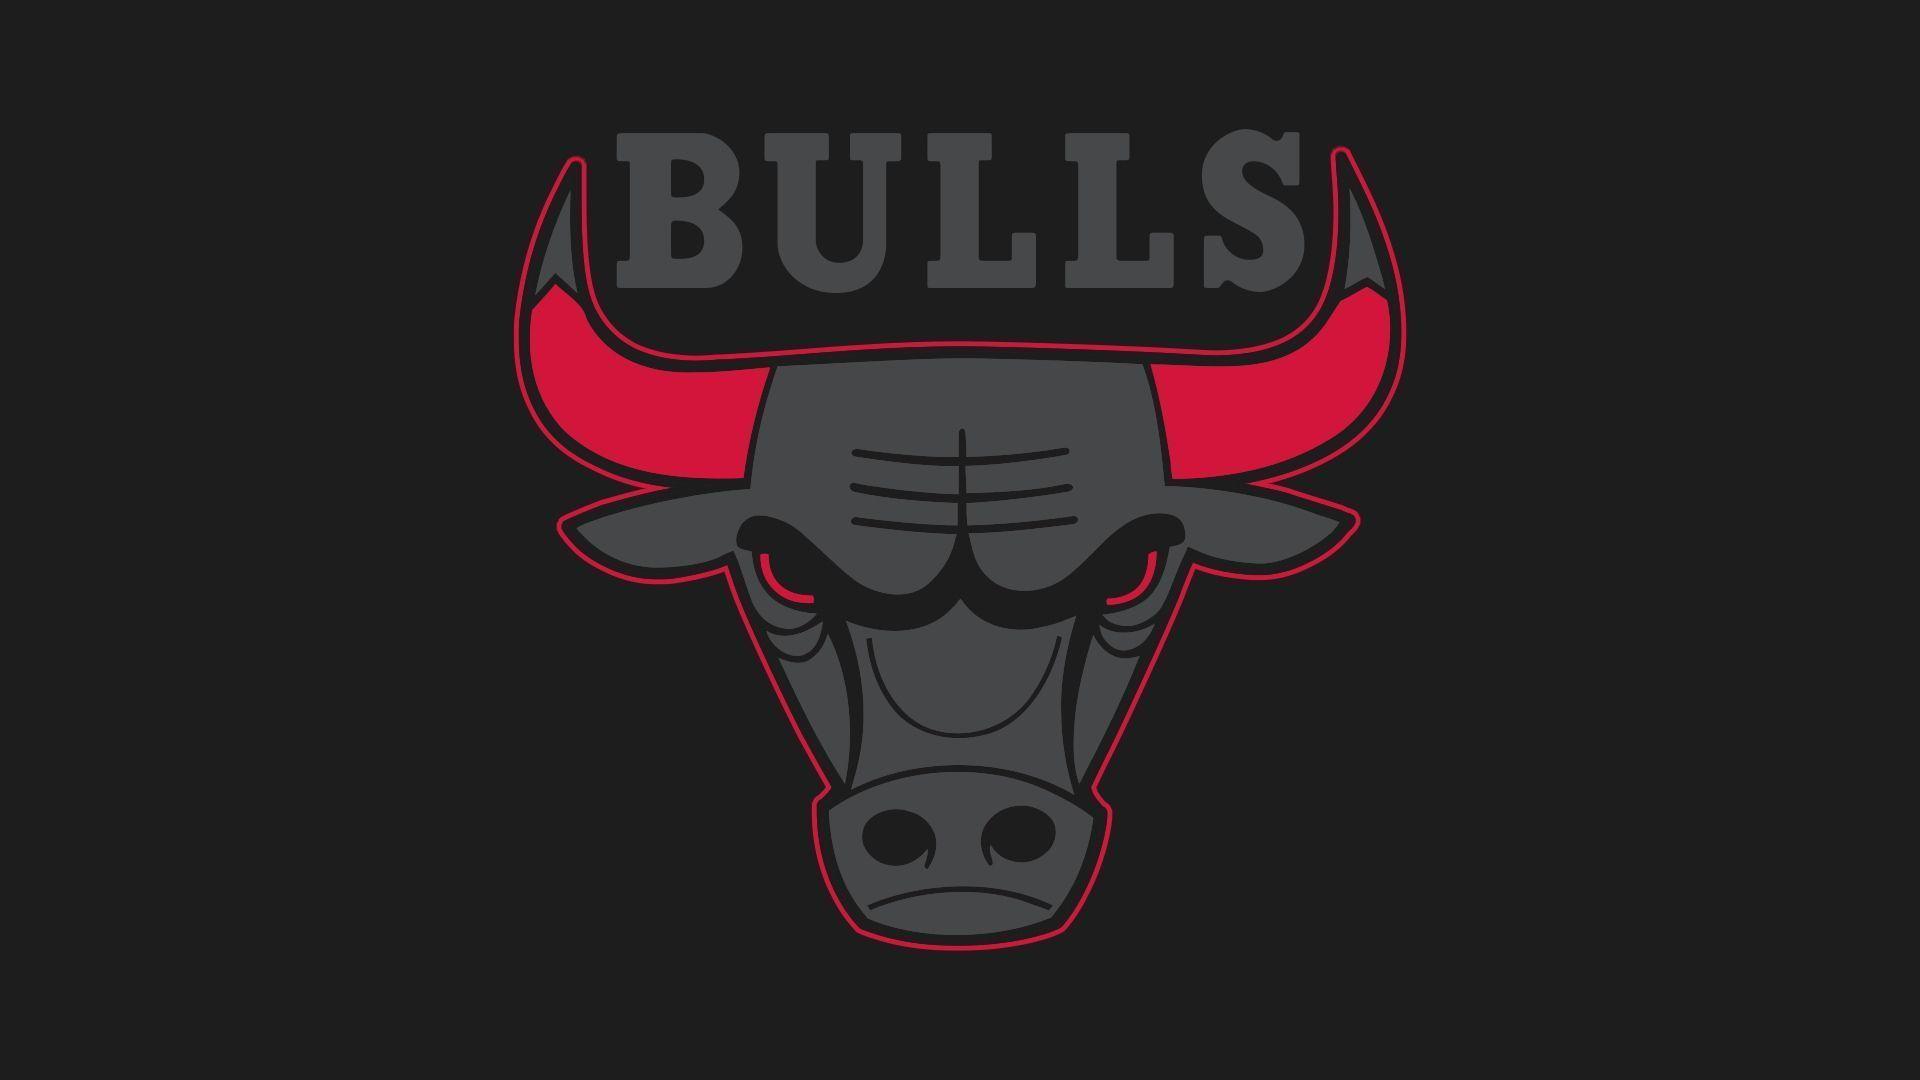 Chicago Bulls Wallpaper High Definition zD. Awesomeness